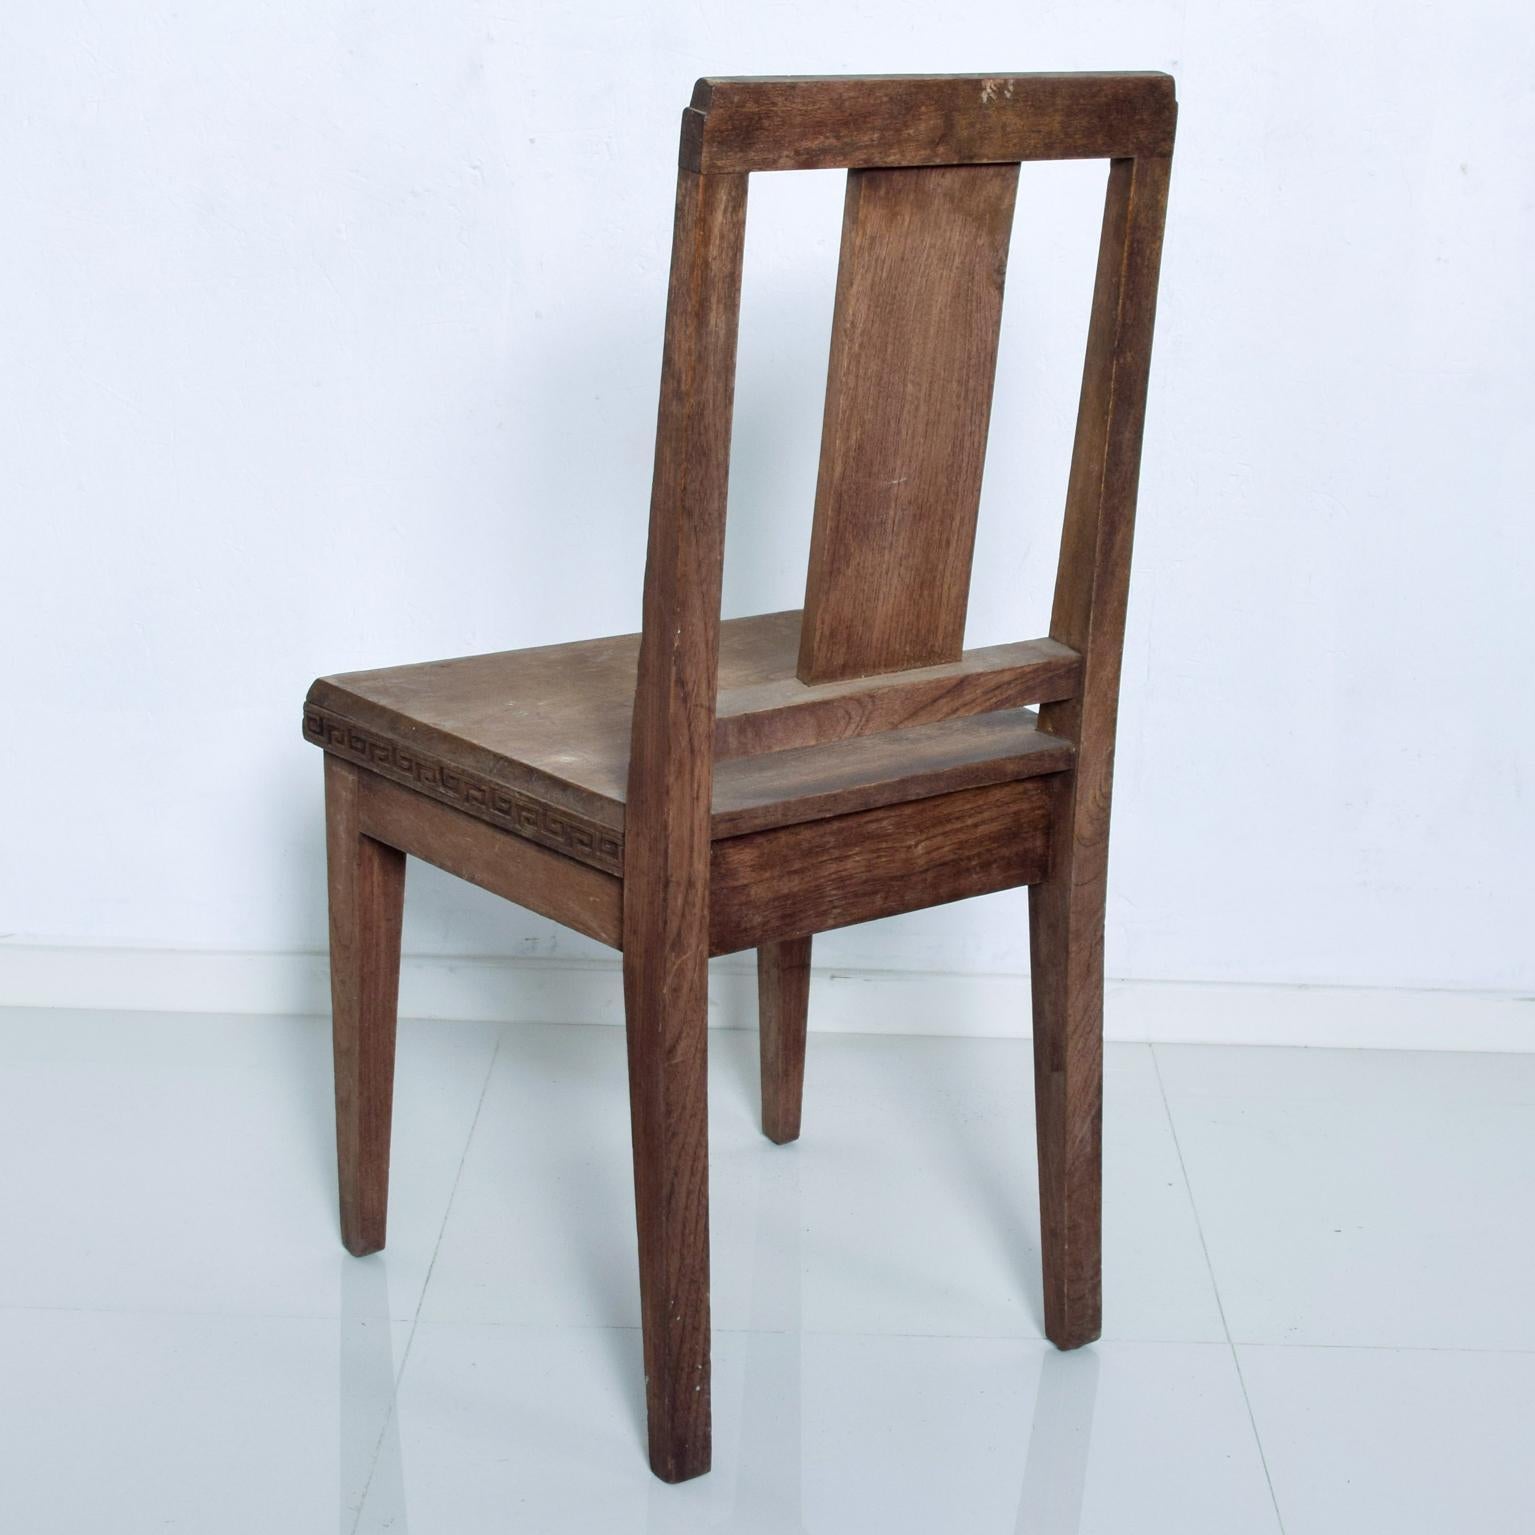 Greek Frank Lloyd Wright Motif Pair of Solid Wood Chairs Made in Hong Kong 1